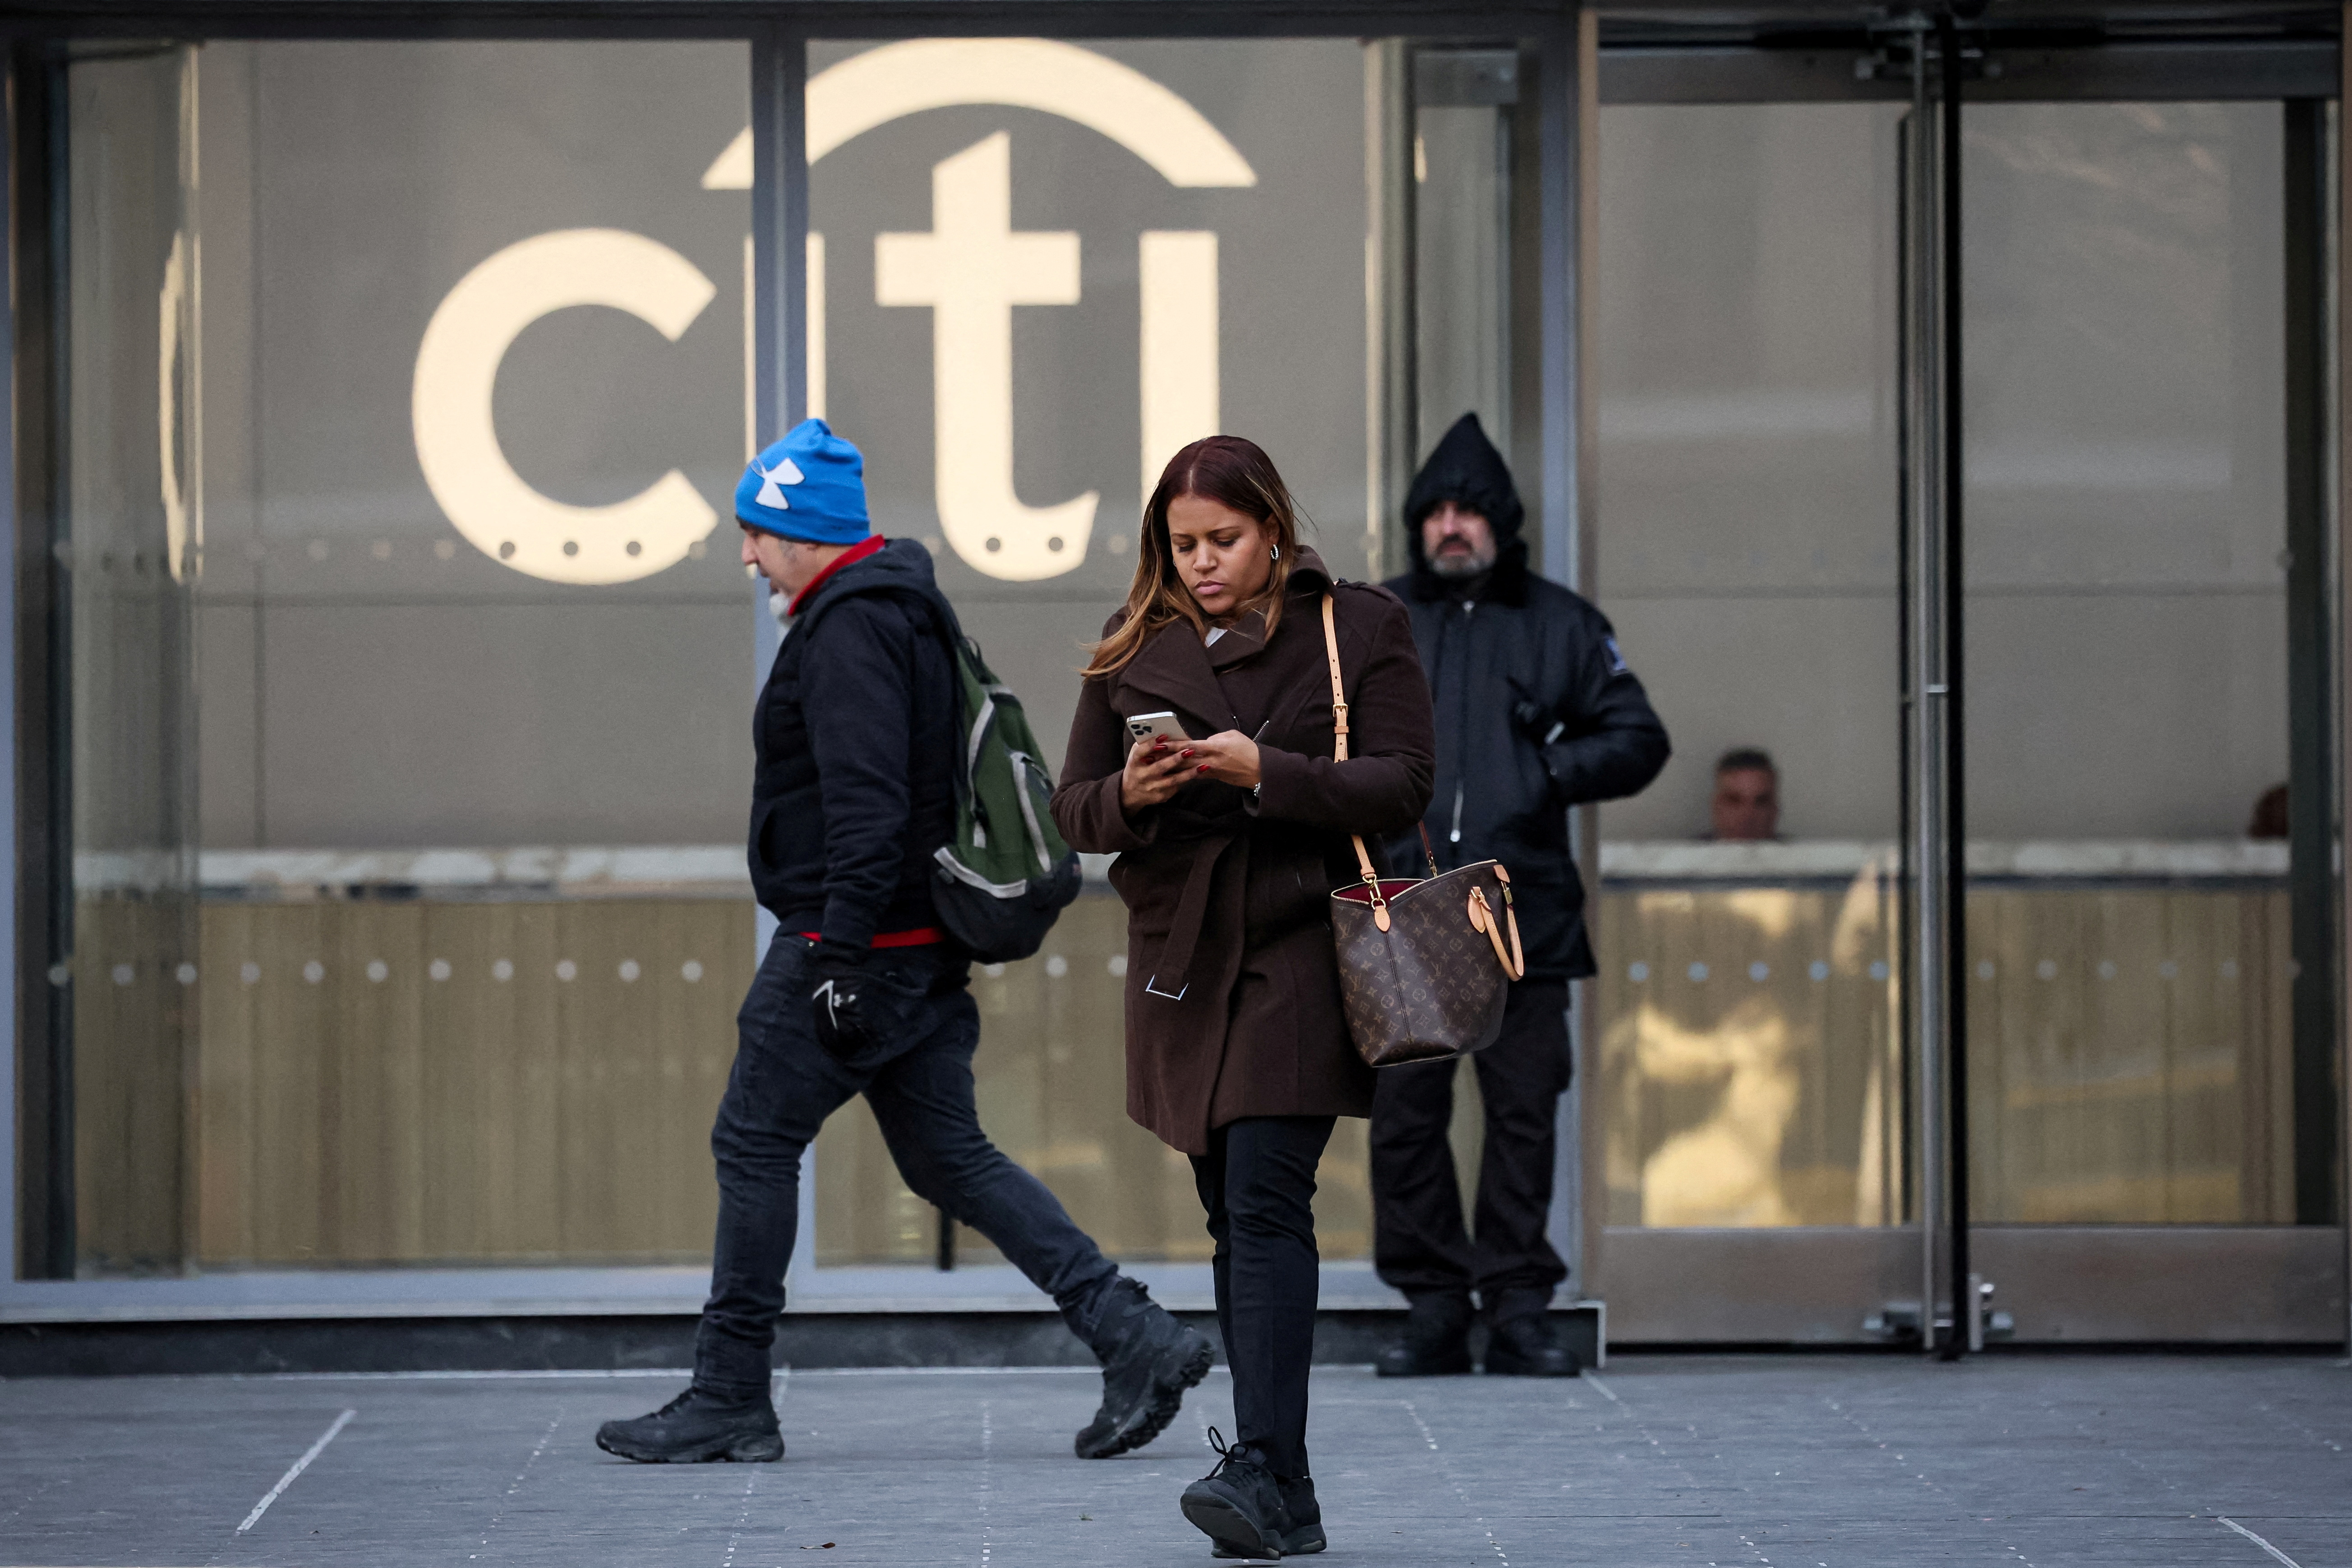 Workers exit the Citi Headquarters in New York